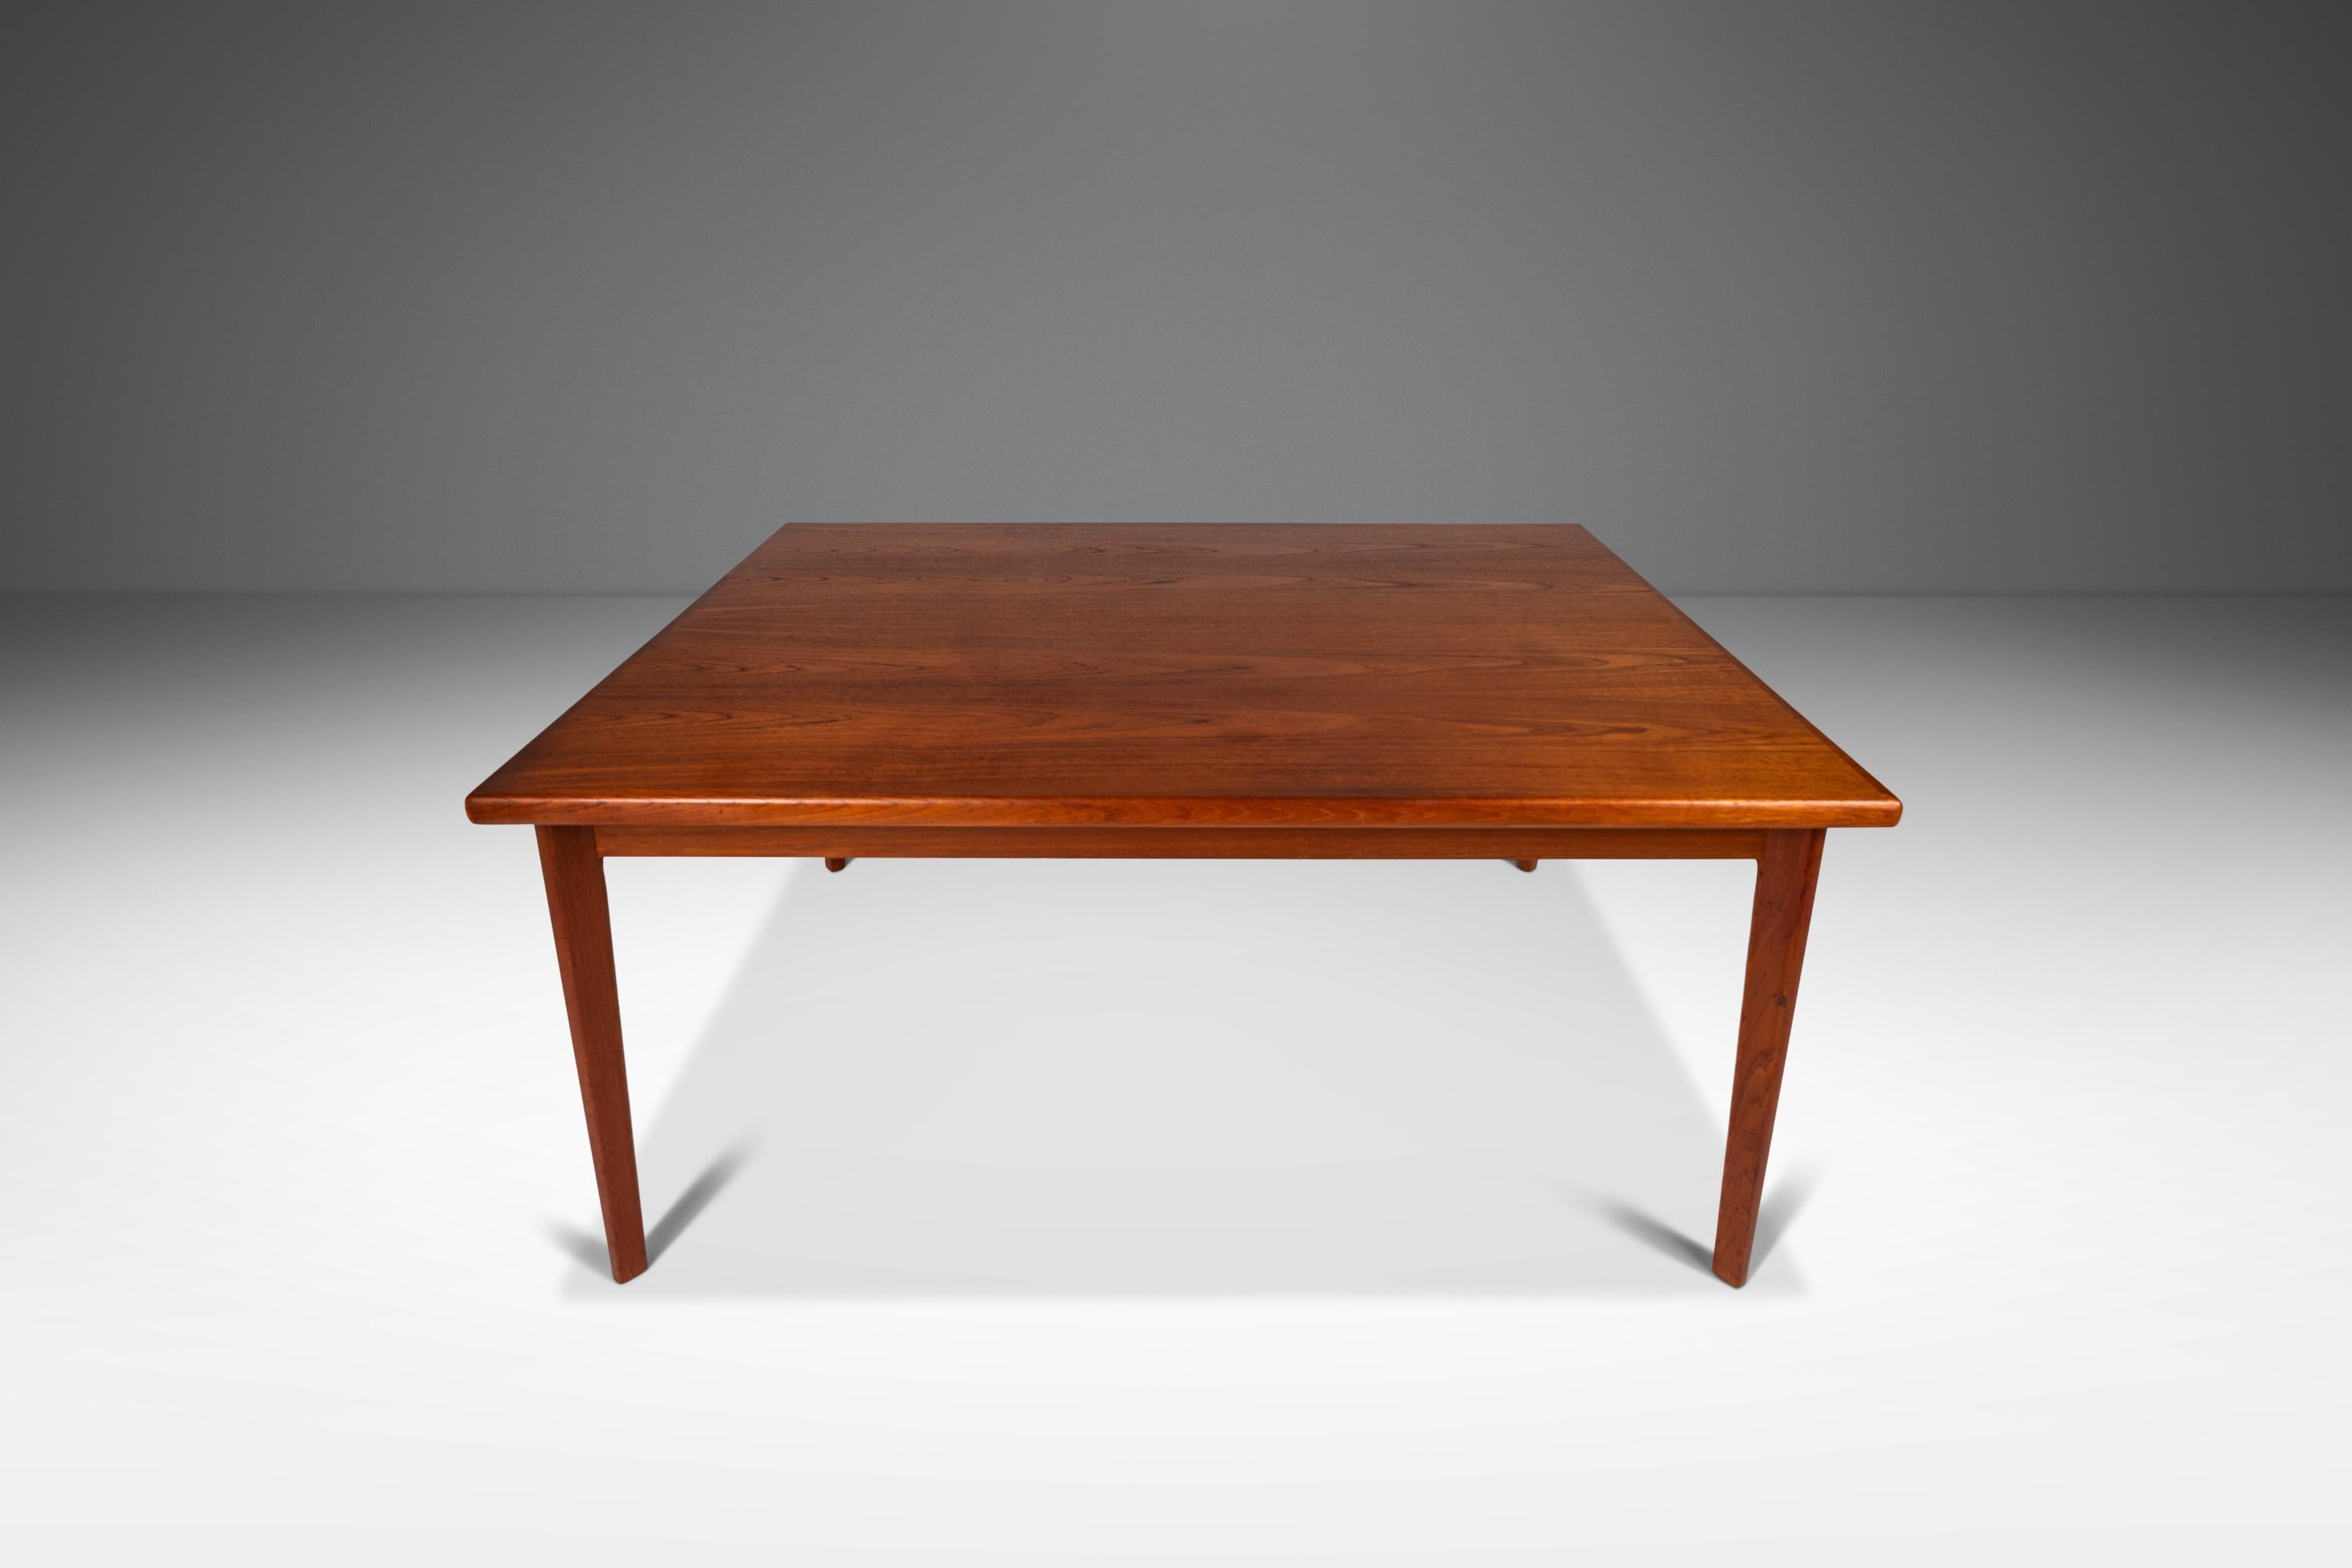 Danish Teak Expansion Dining Table w/ Stow-in Leaves by BRDR Furbo, Denmark, c. 1960s For Sale